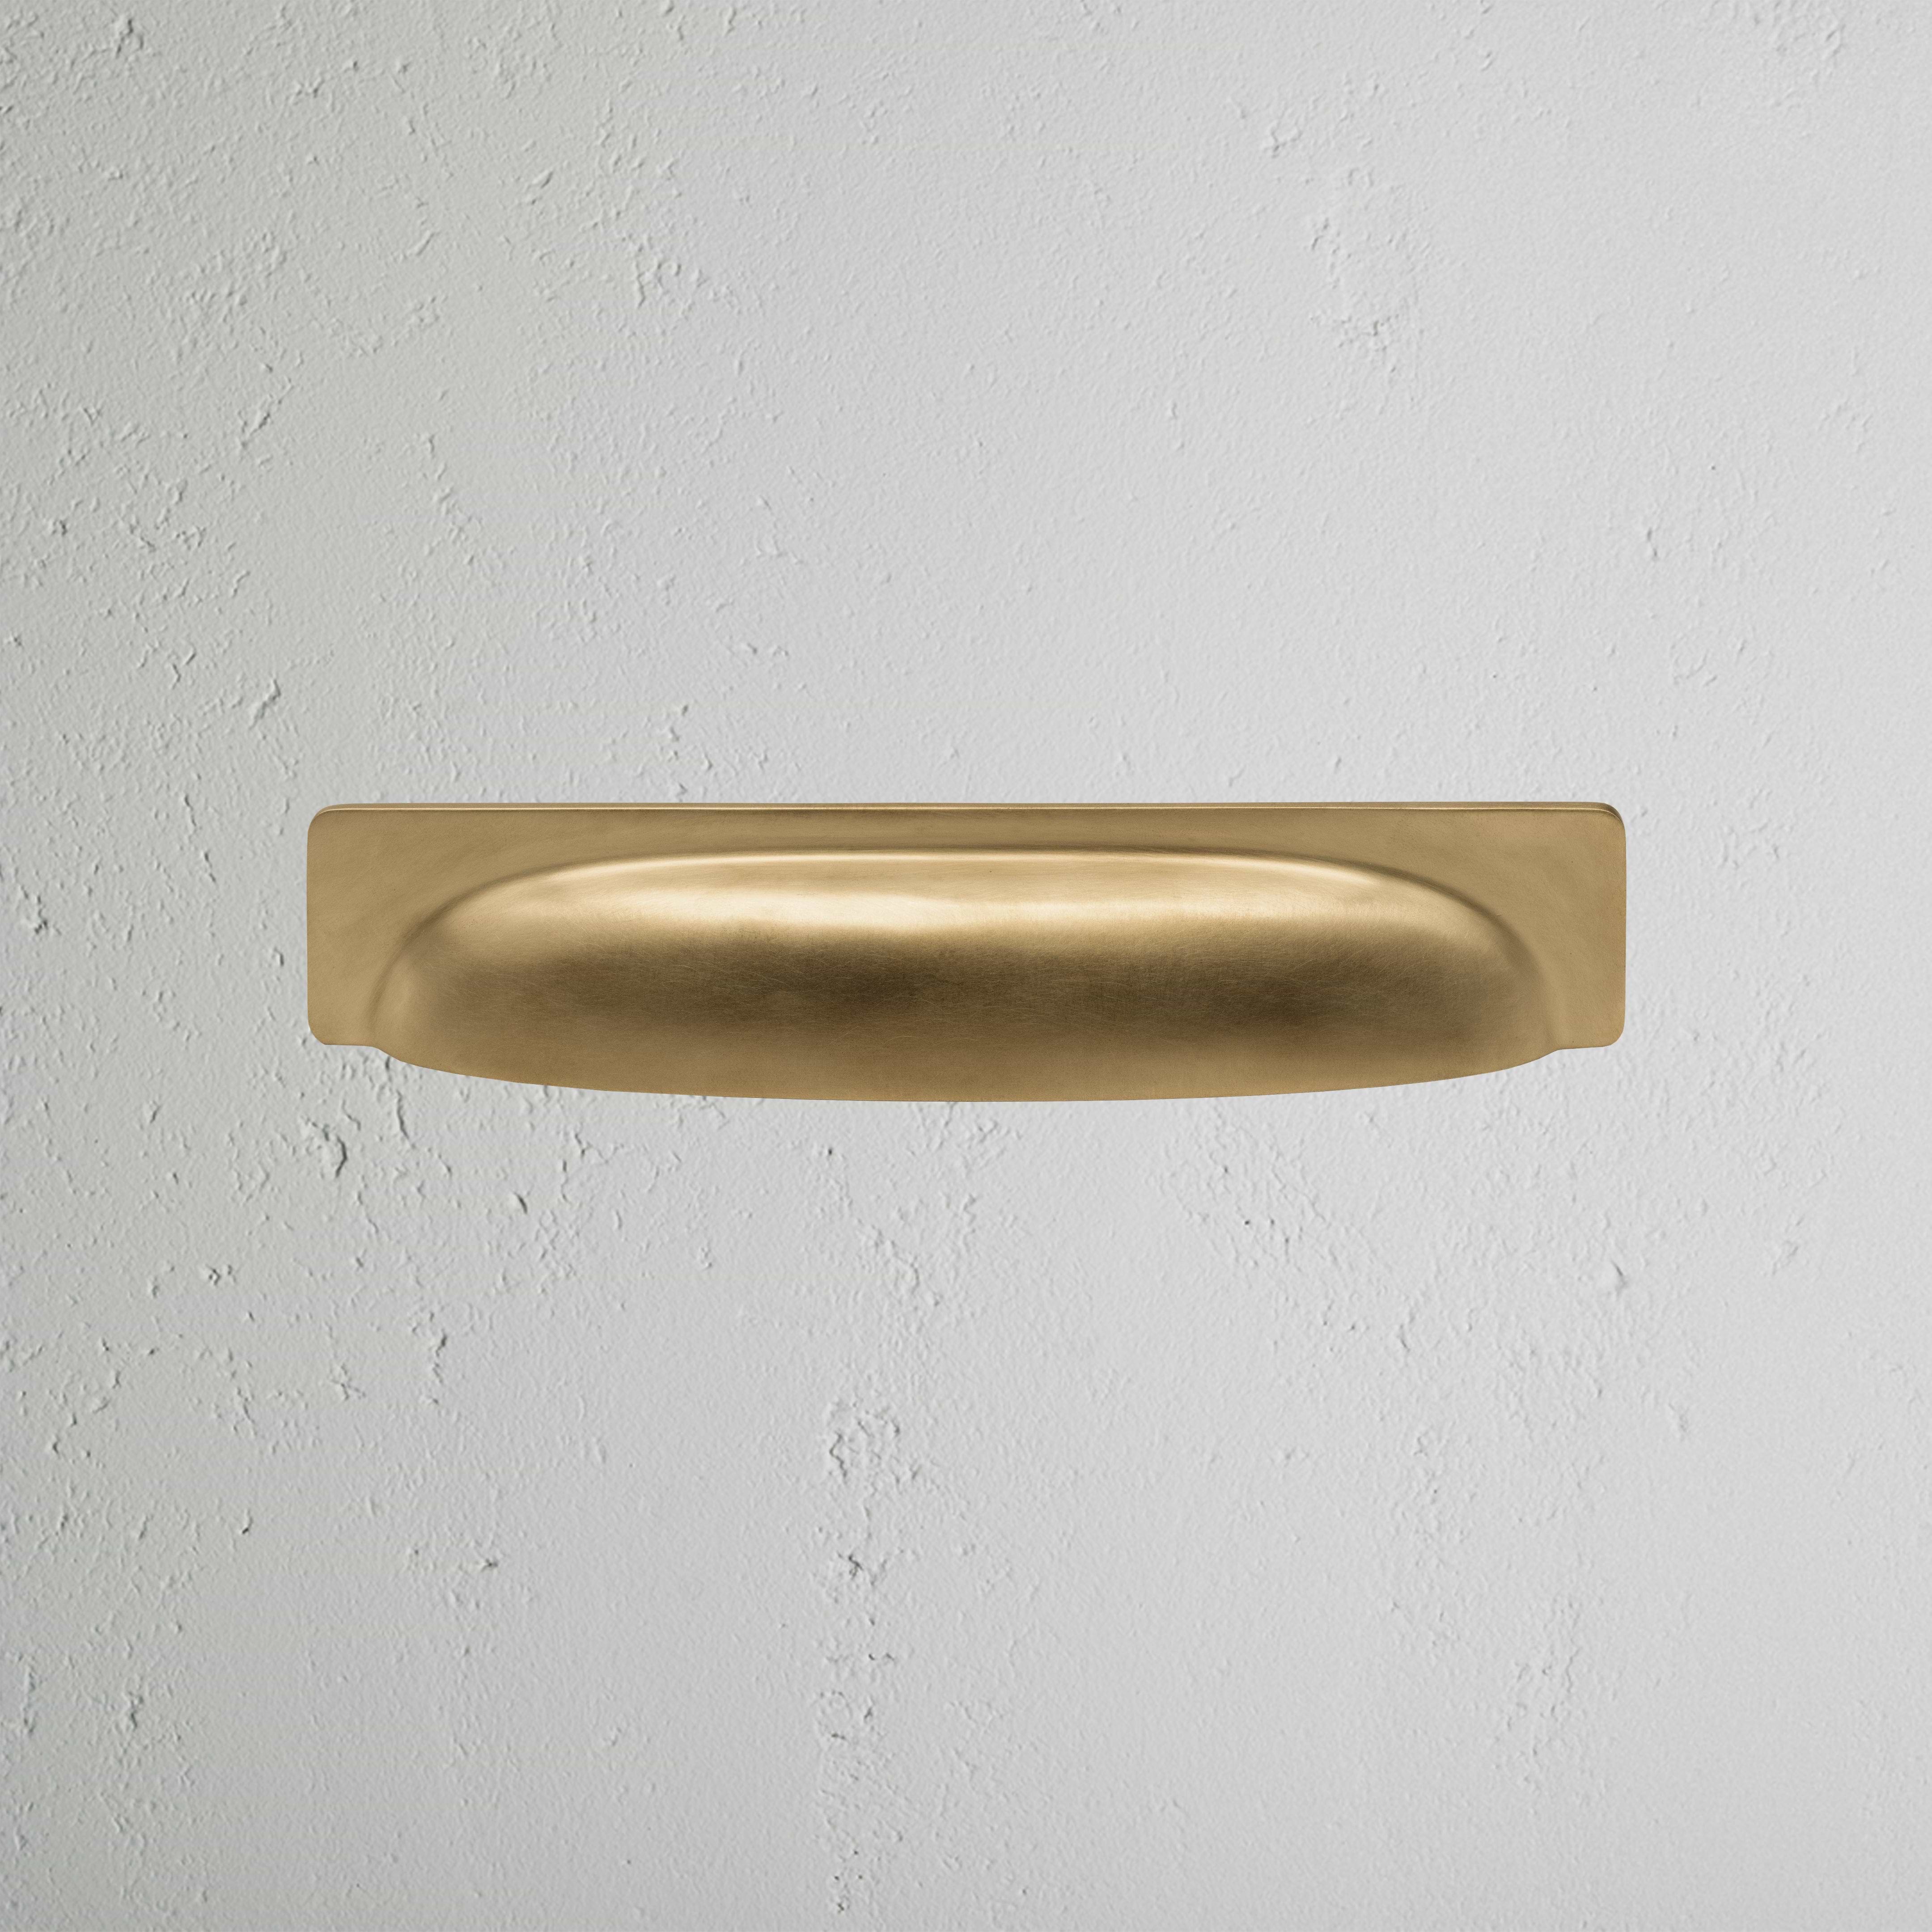 Antique Brass Elm Cup Handle on White Background